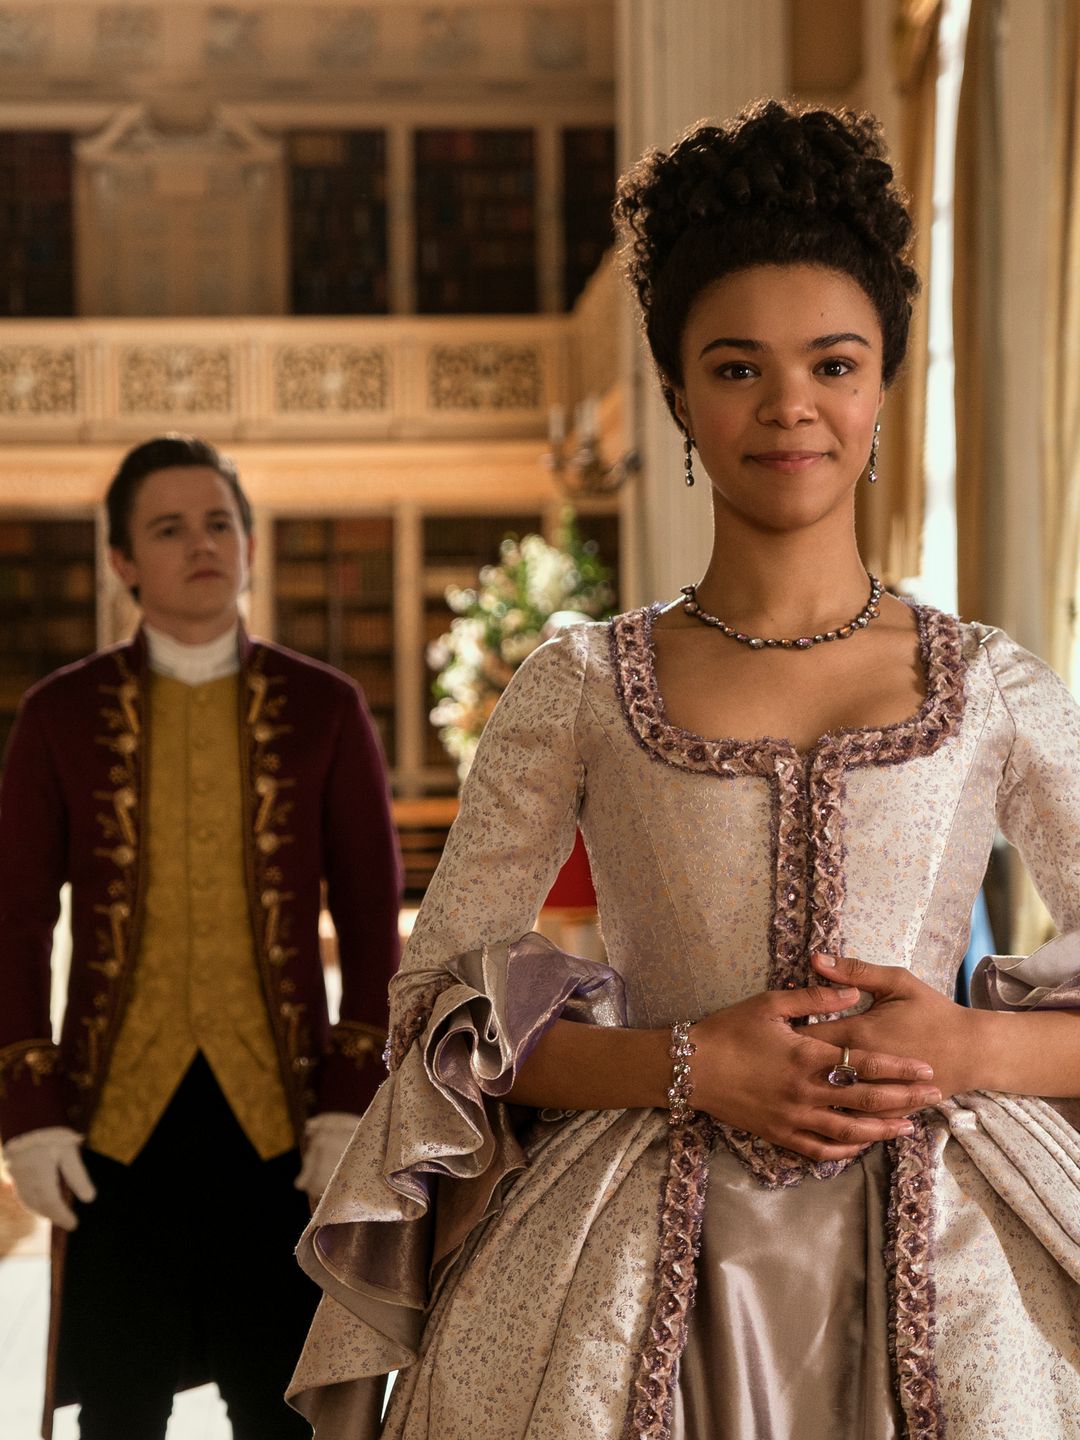 Queen Charlotte's right-hand man is the first LBGT character on the show